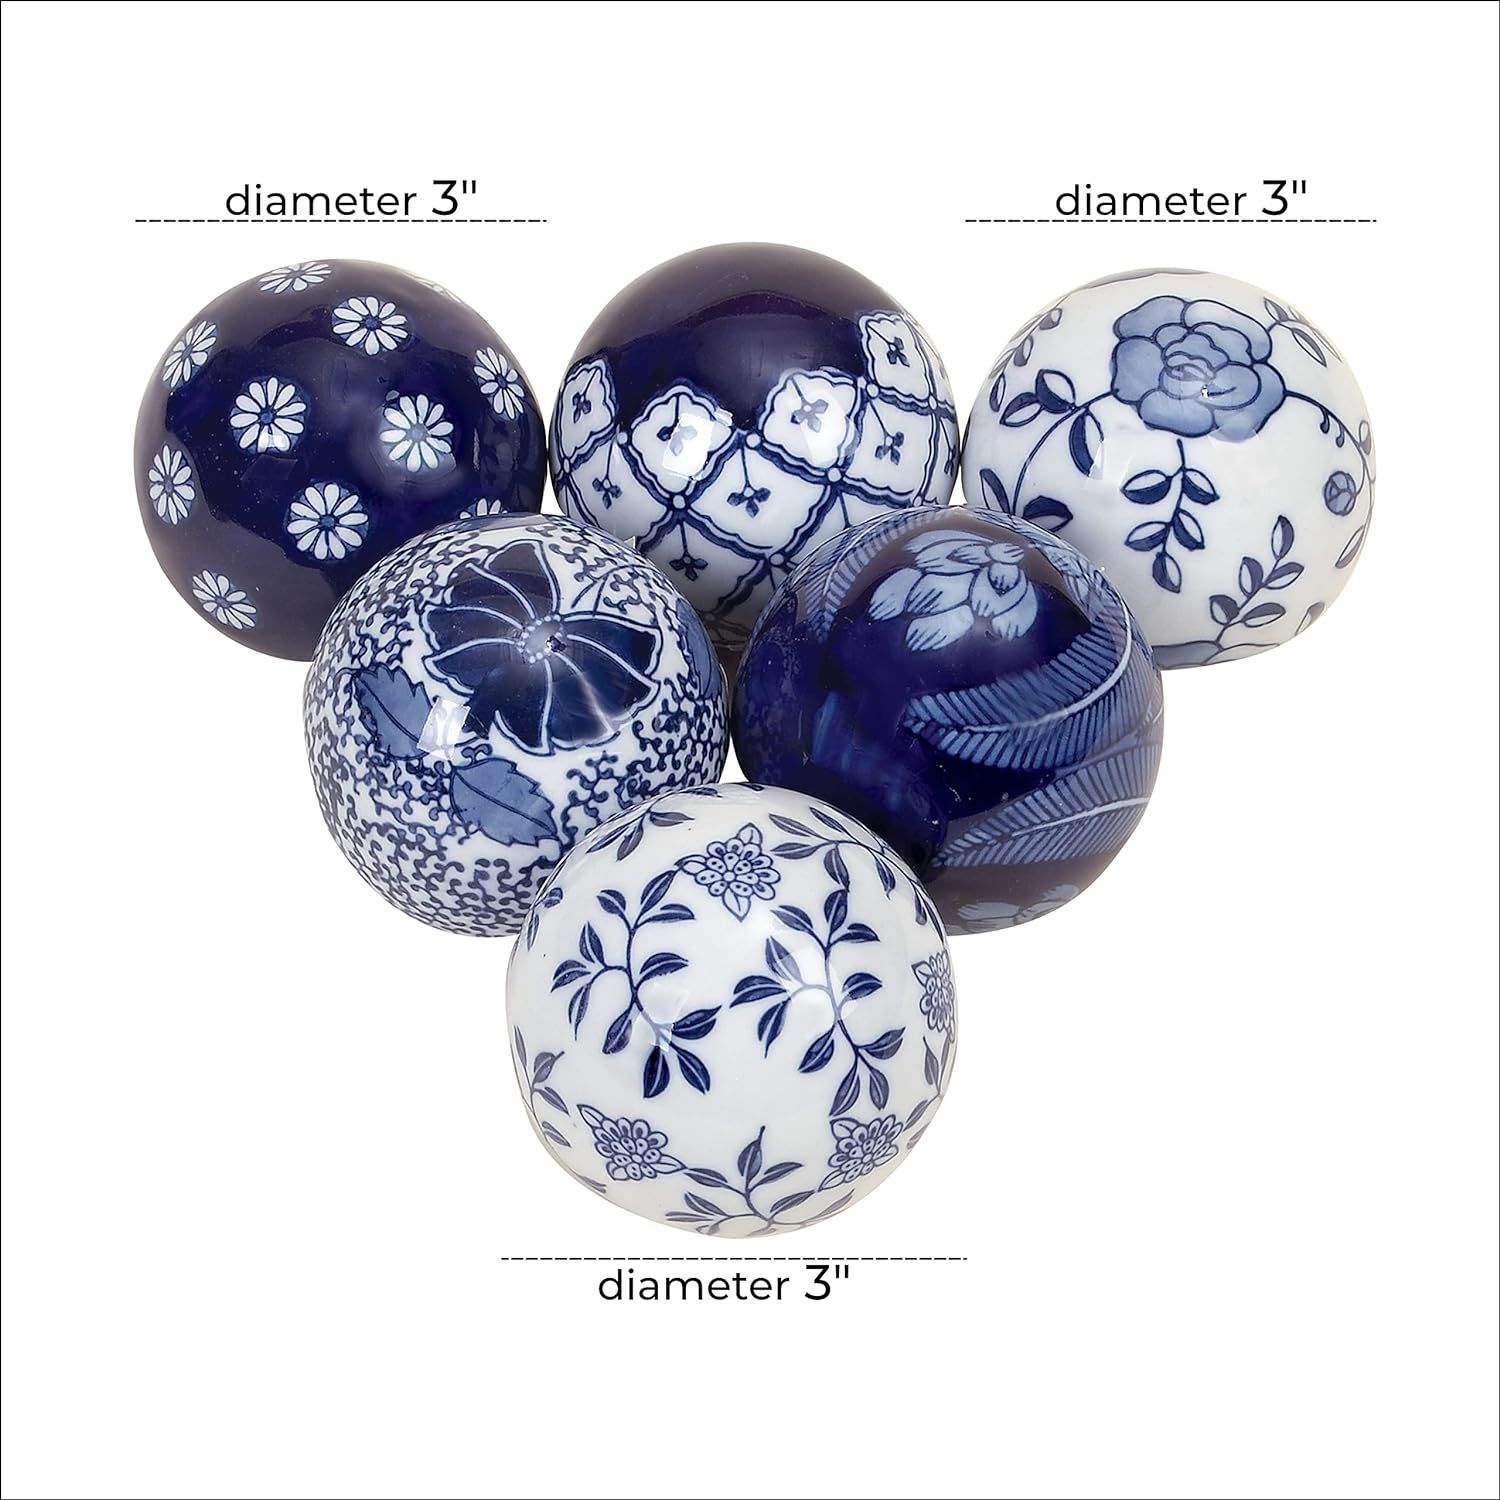 Deco 79 Ceramic Round Orbs & Vase Filler with Varying Patterns, Set of 6 3"D, Blue | Amazon (US)